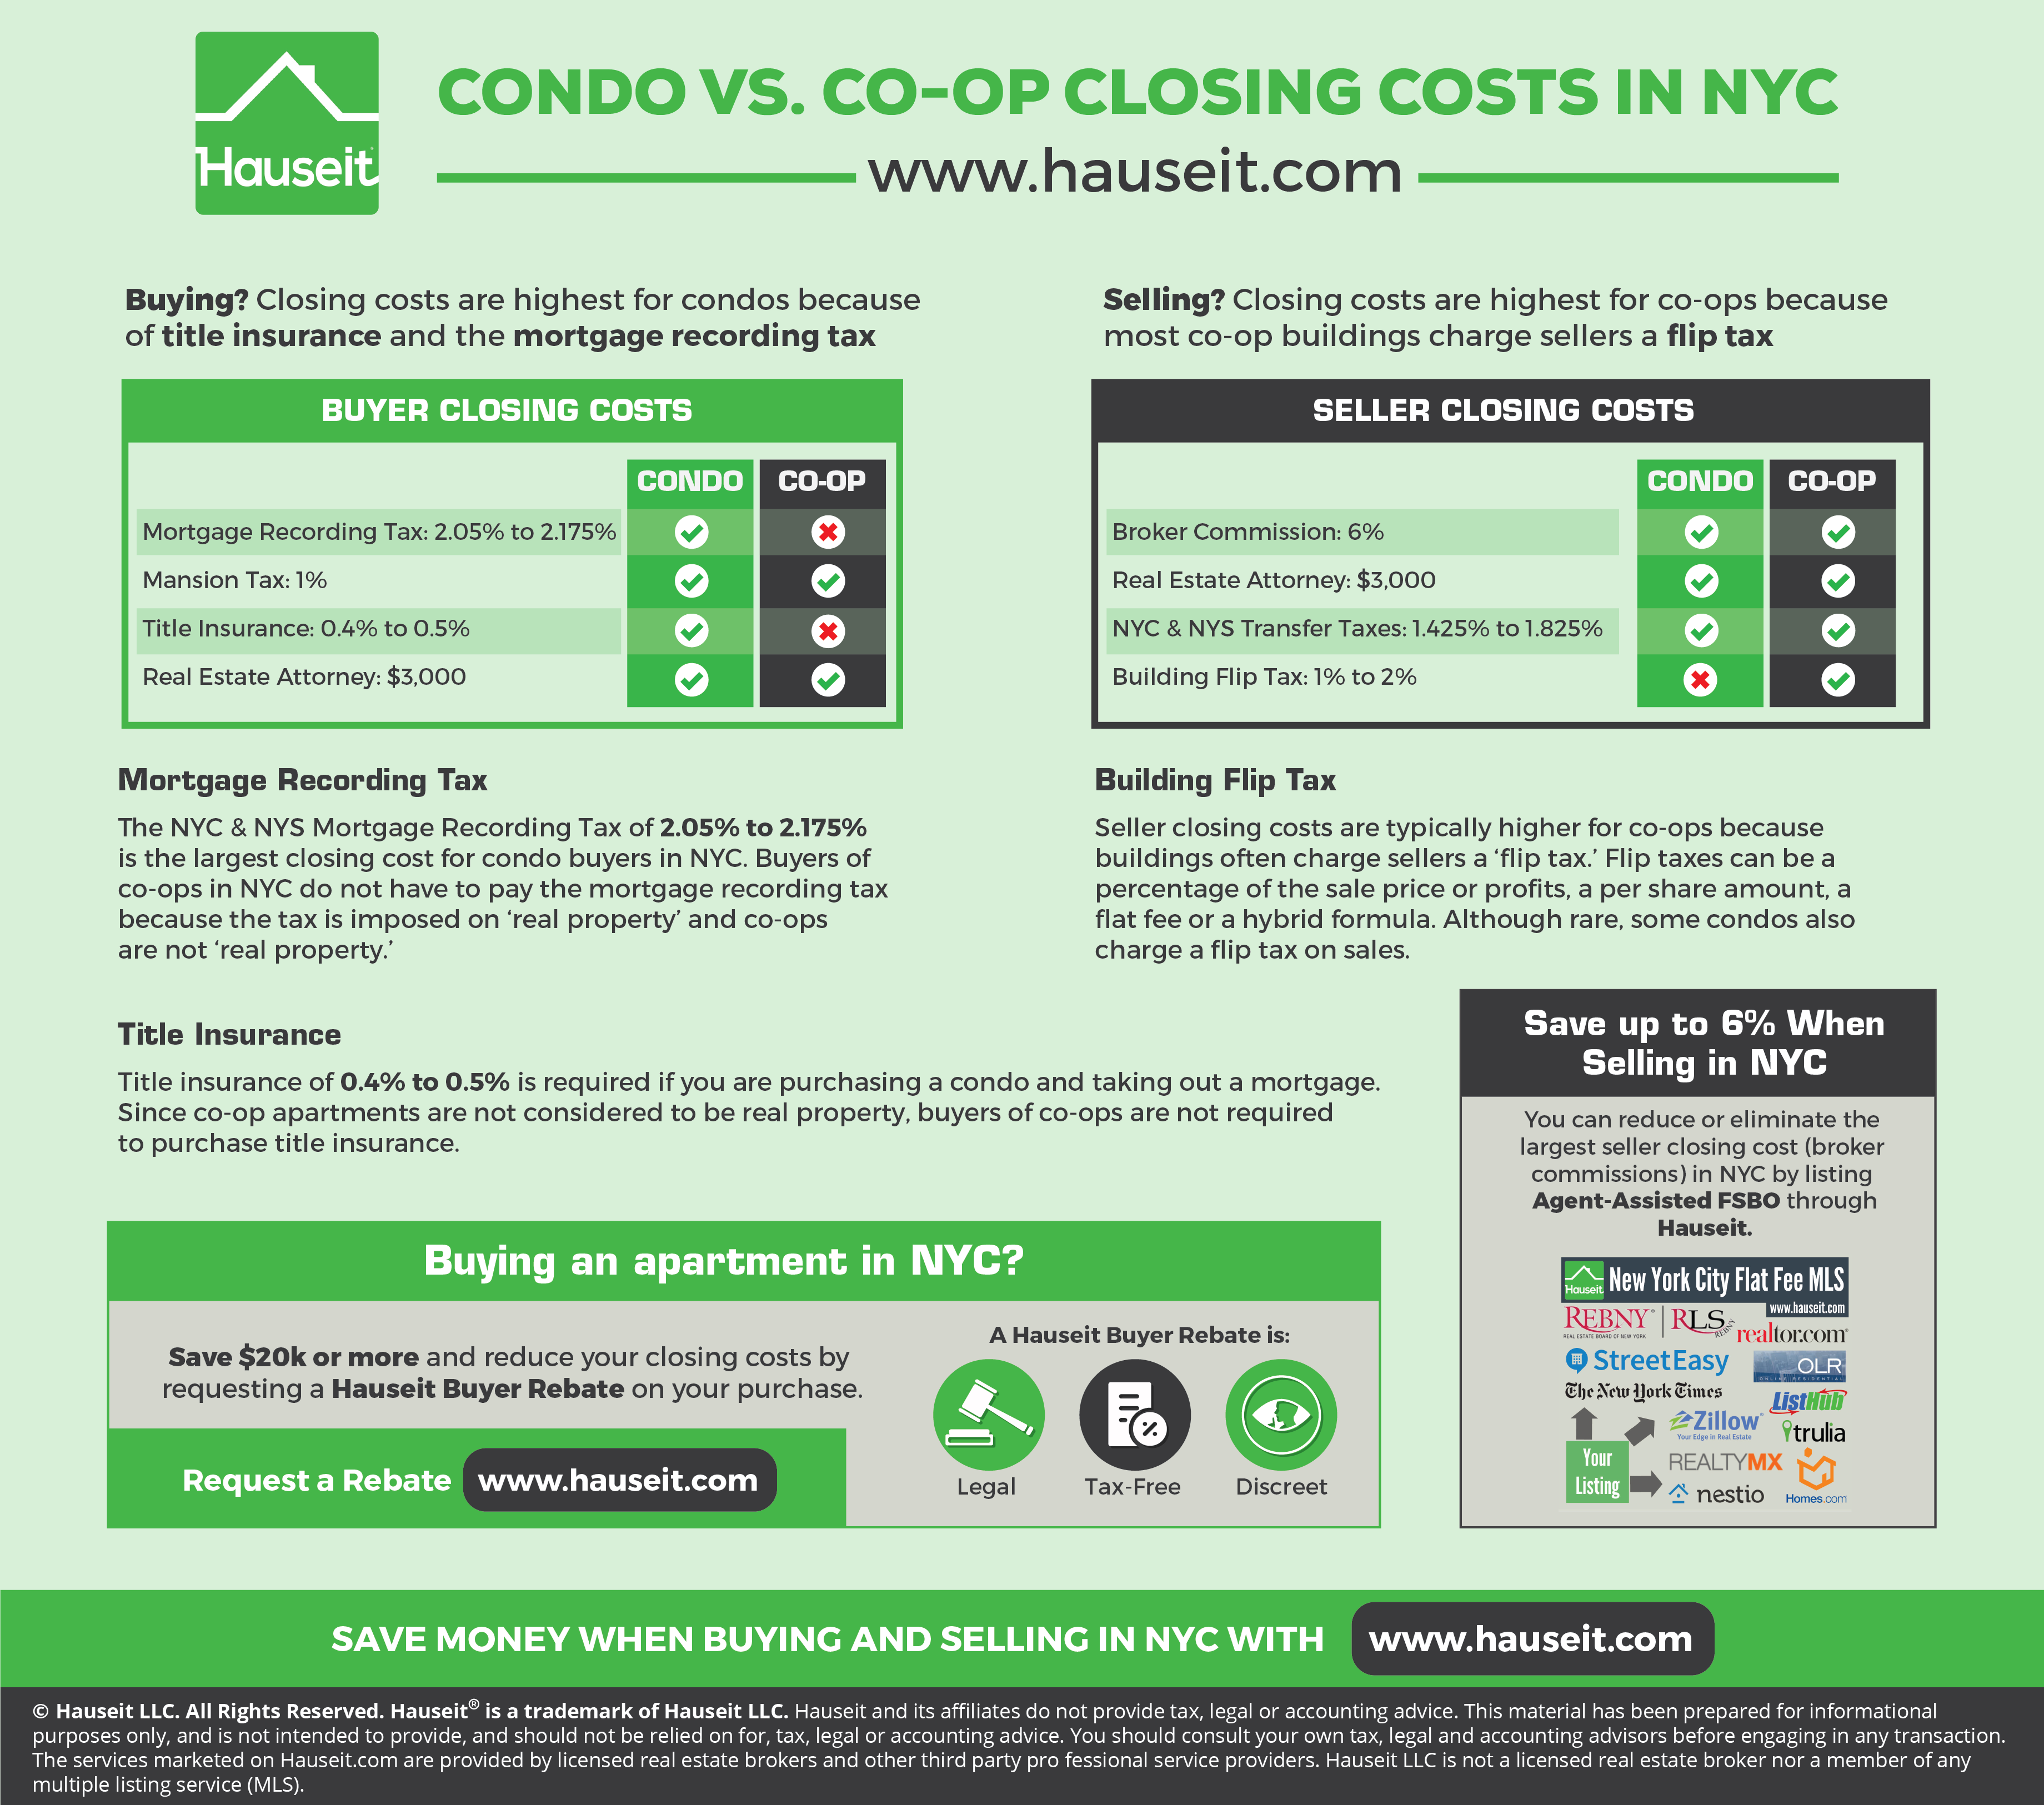 Buying a home in NYC? Closing costs are highest for condos because of title insurance and the mortgage recording tax. Selling a property in New York City? Closing Costs are highest for co-ops because most NYC co-op buildings charge sellers a flip tax.